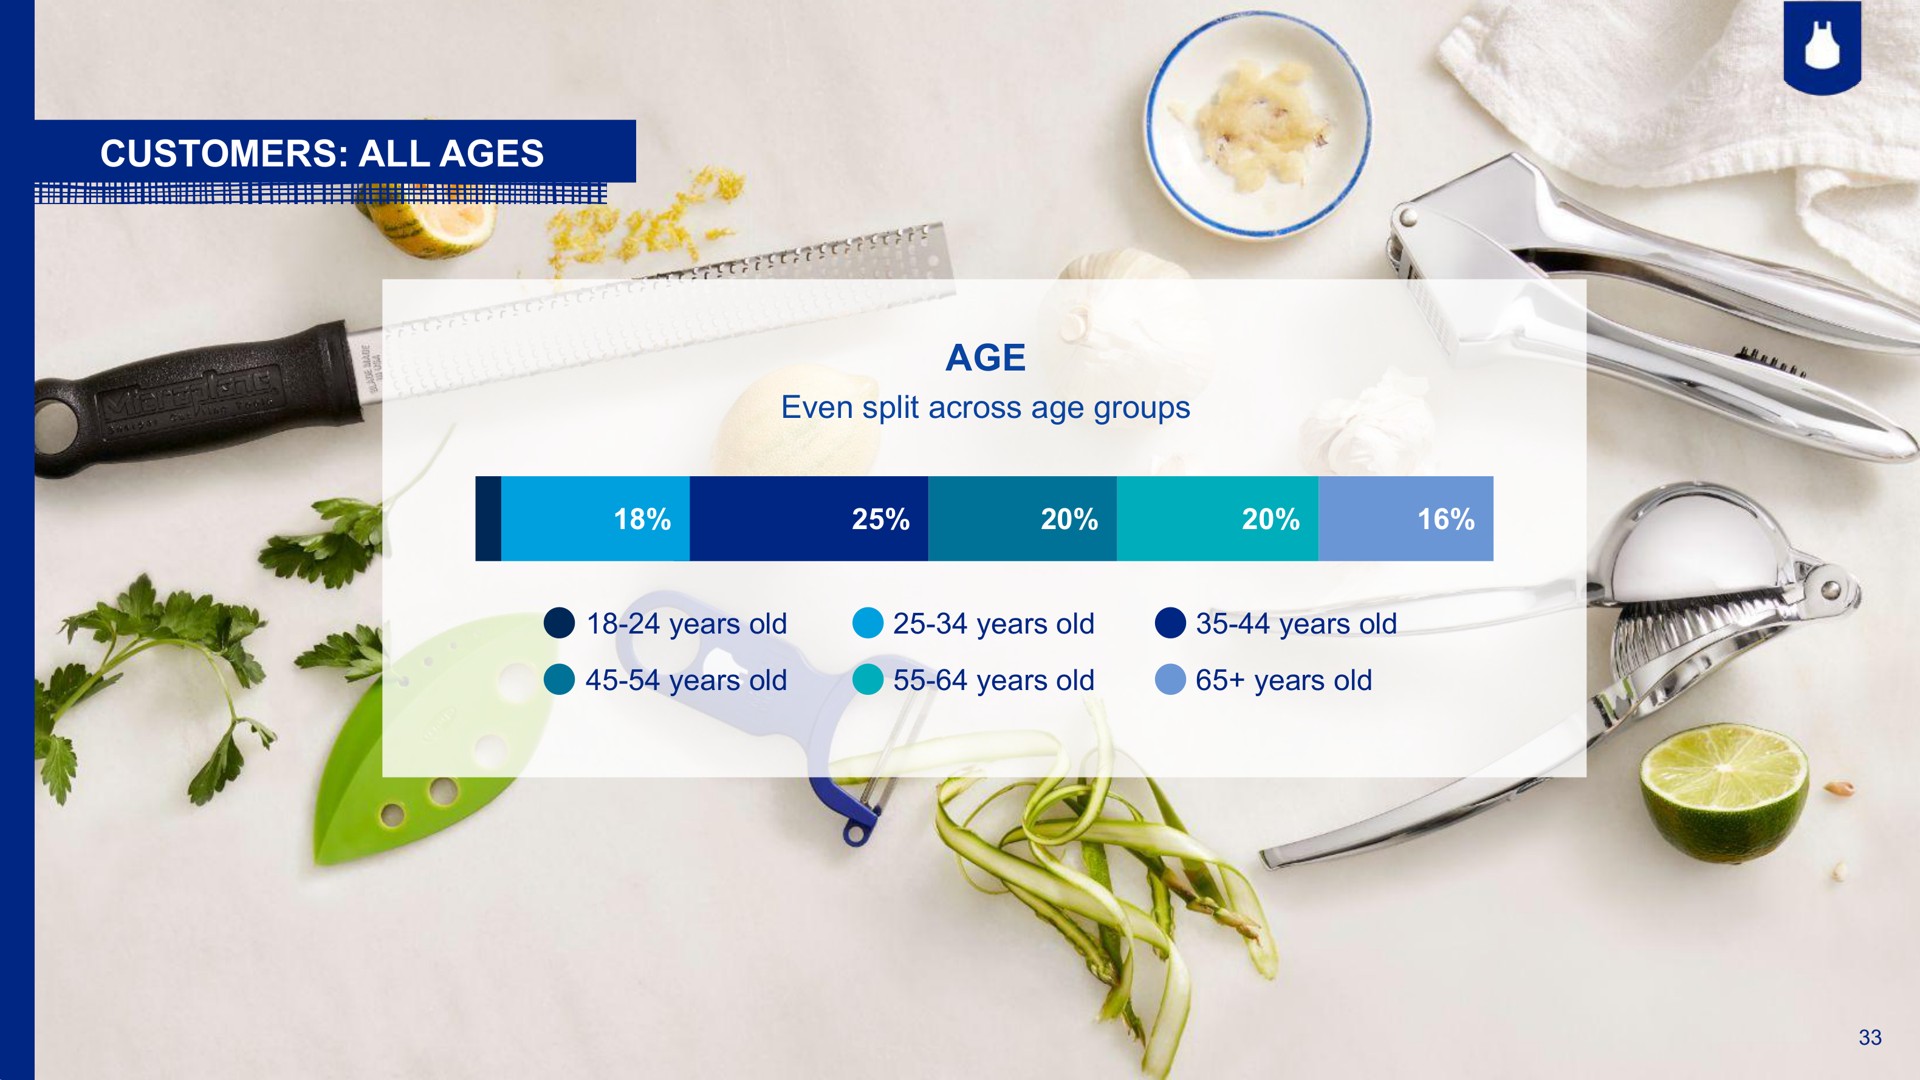 customers all ages age | Blue Apron